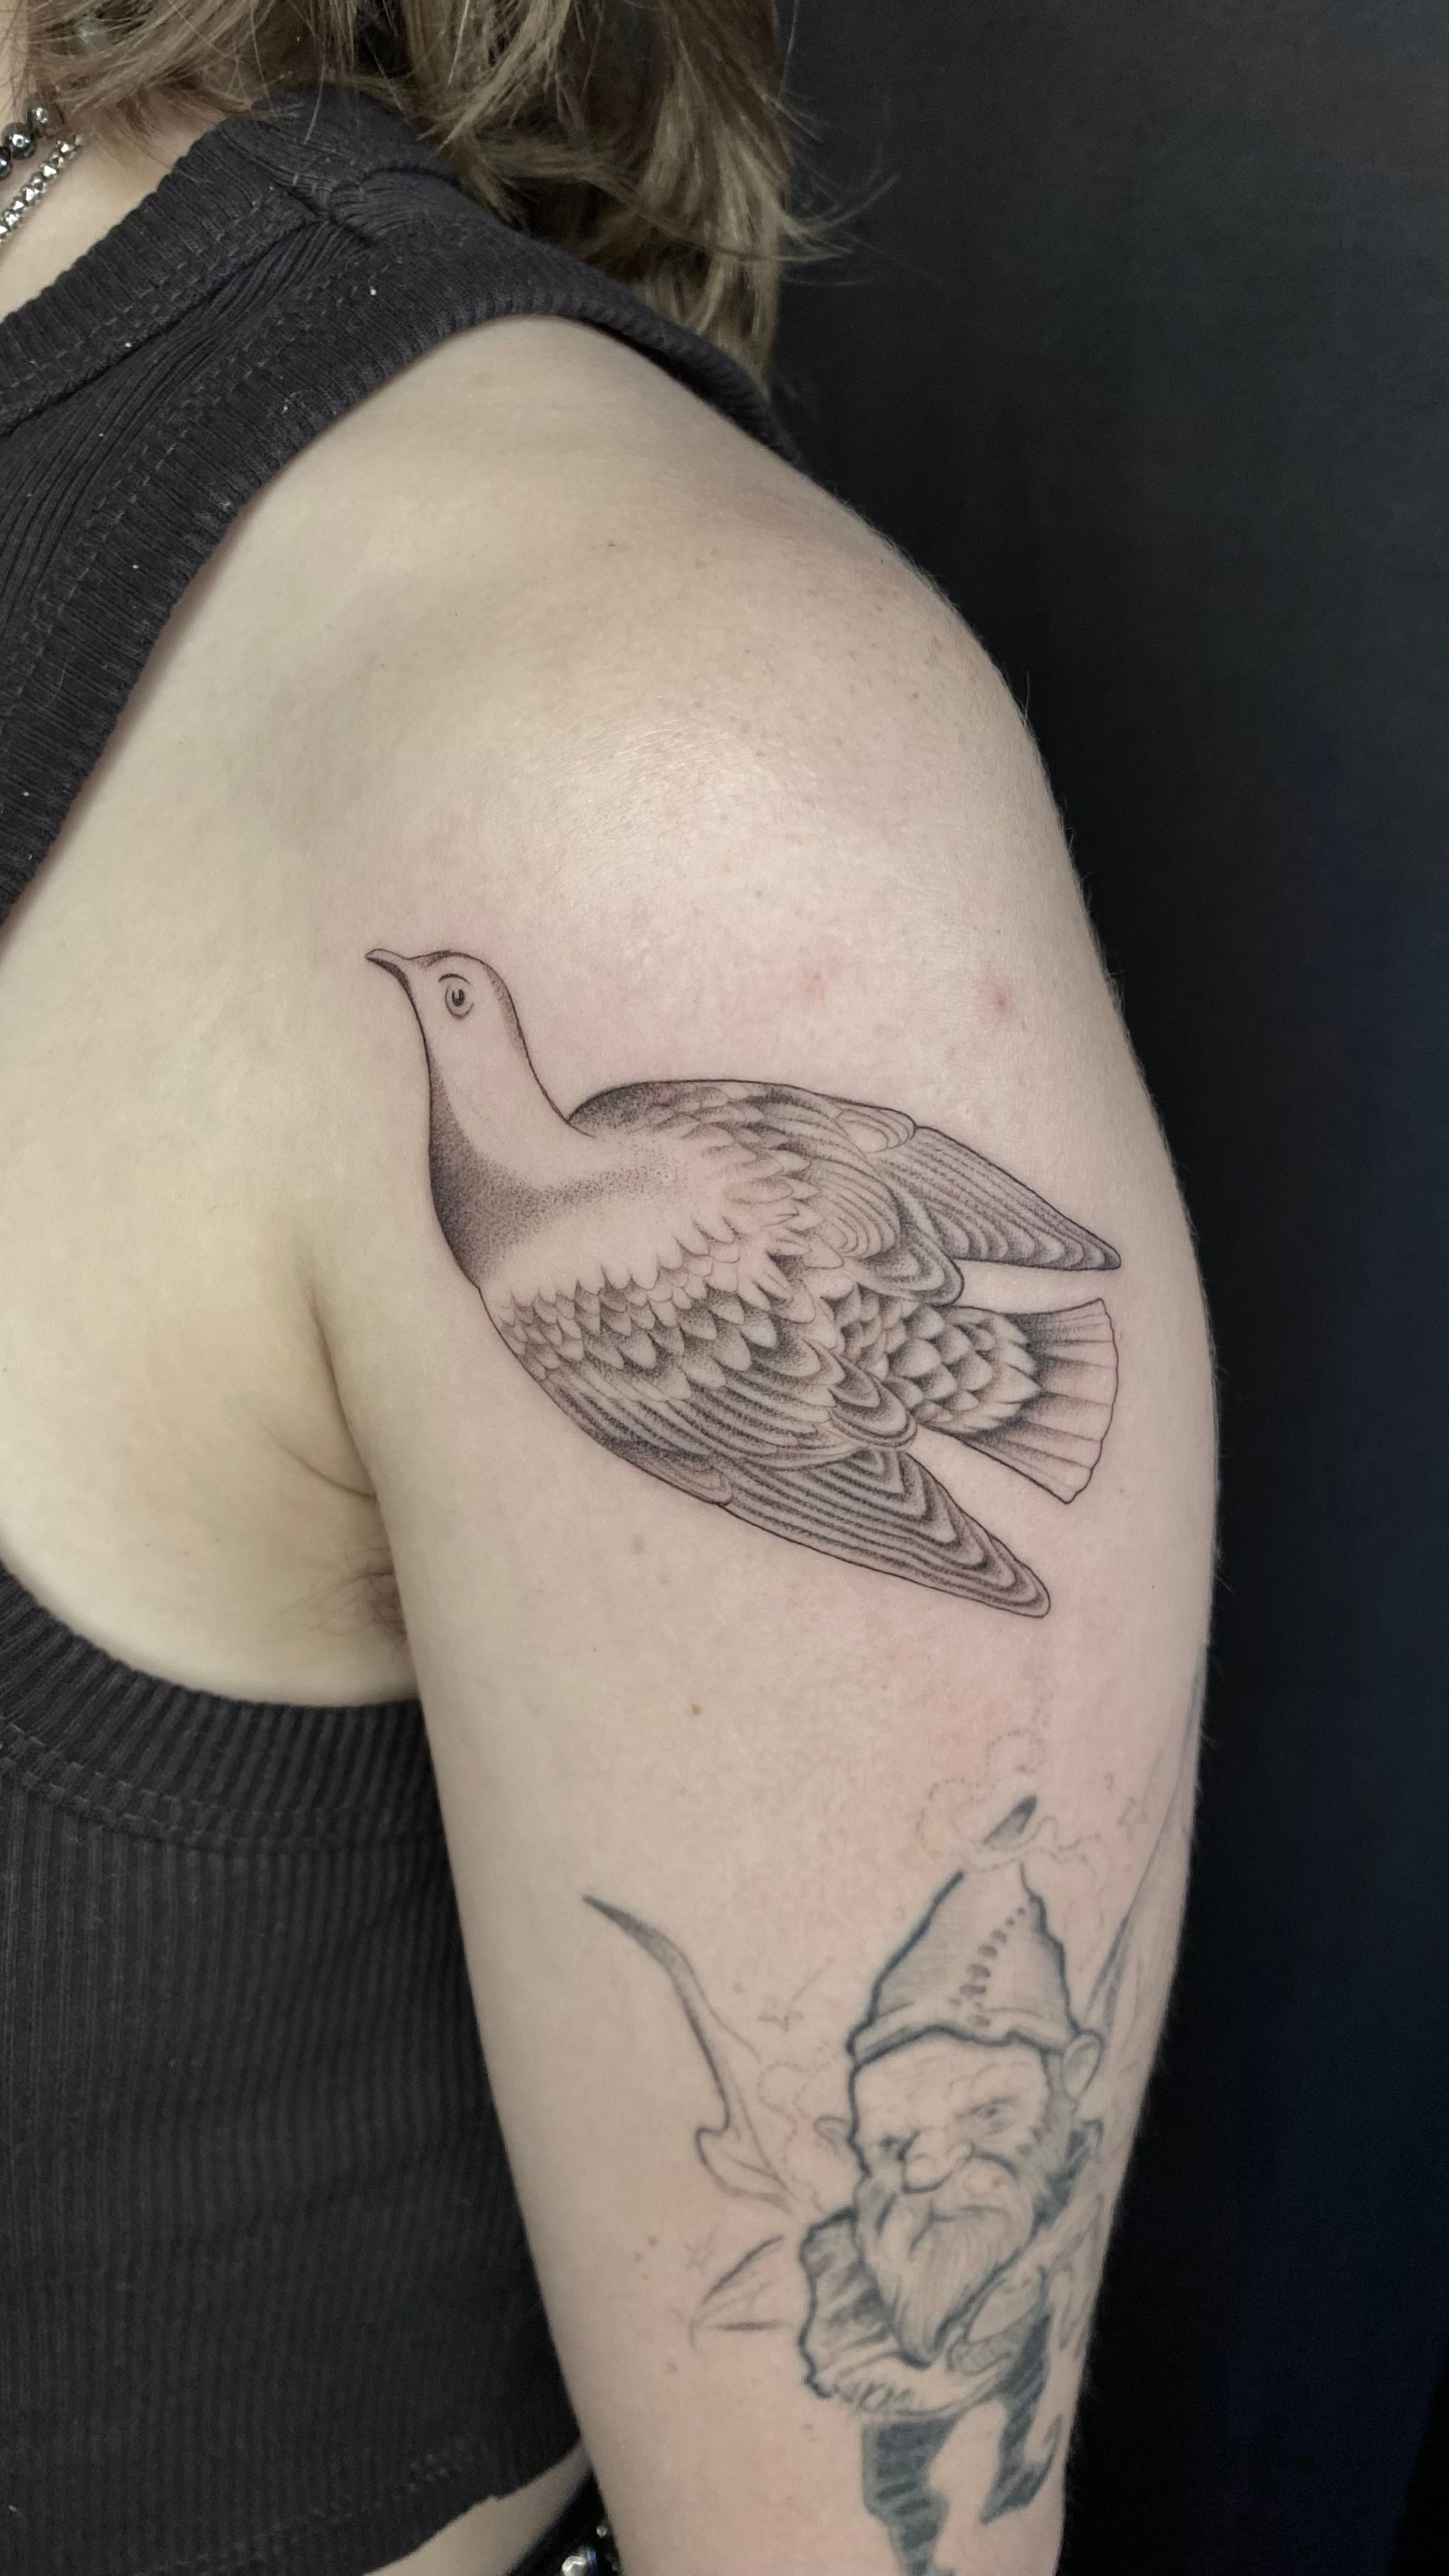 A soul to bare on Tumblr: Bronx pigeon - For appointments ✉️  asoultobaretattoo@gmail.com - #blackworkers #darkartists #newyorkyankees  #bronx #williamsburg...